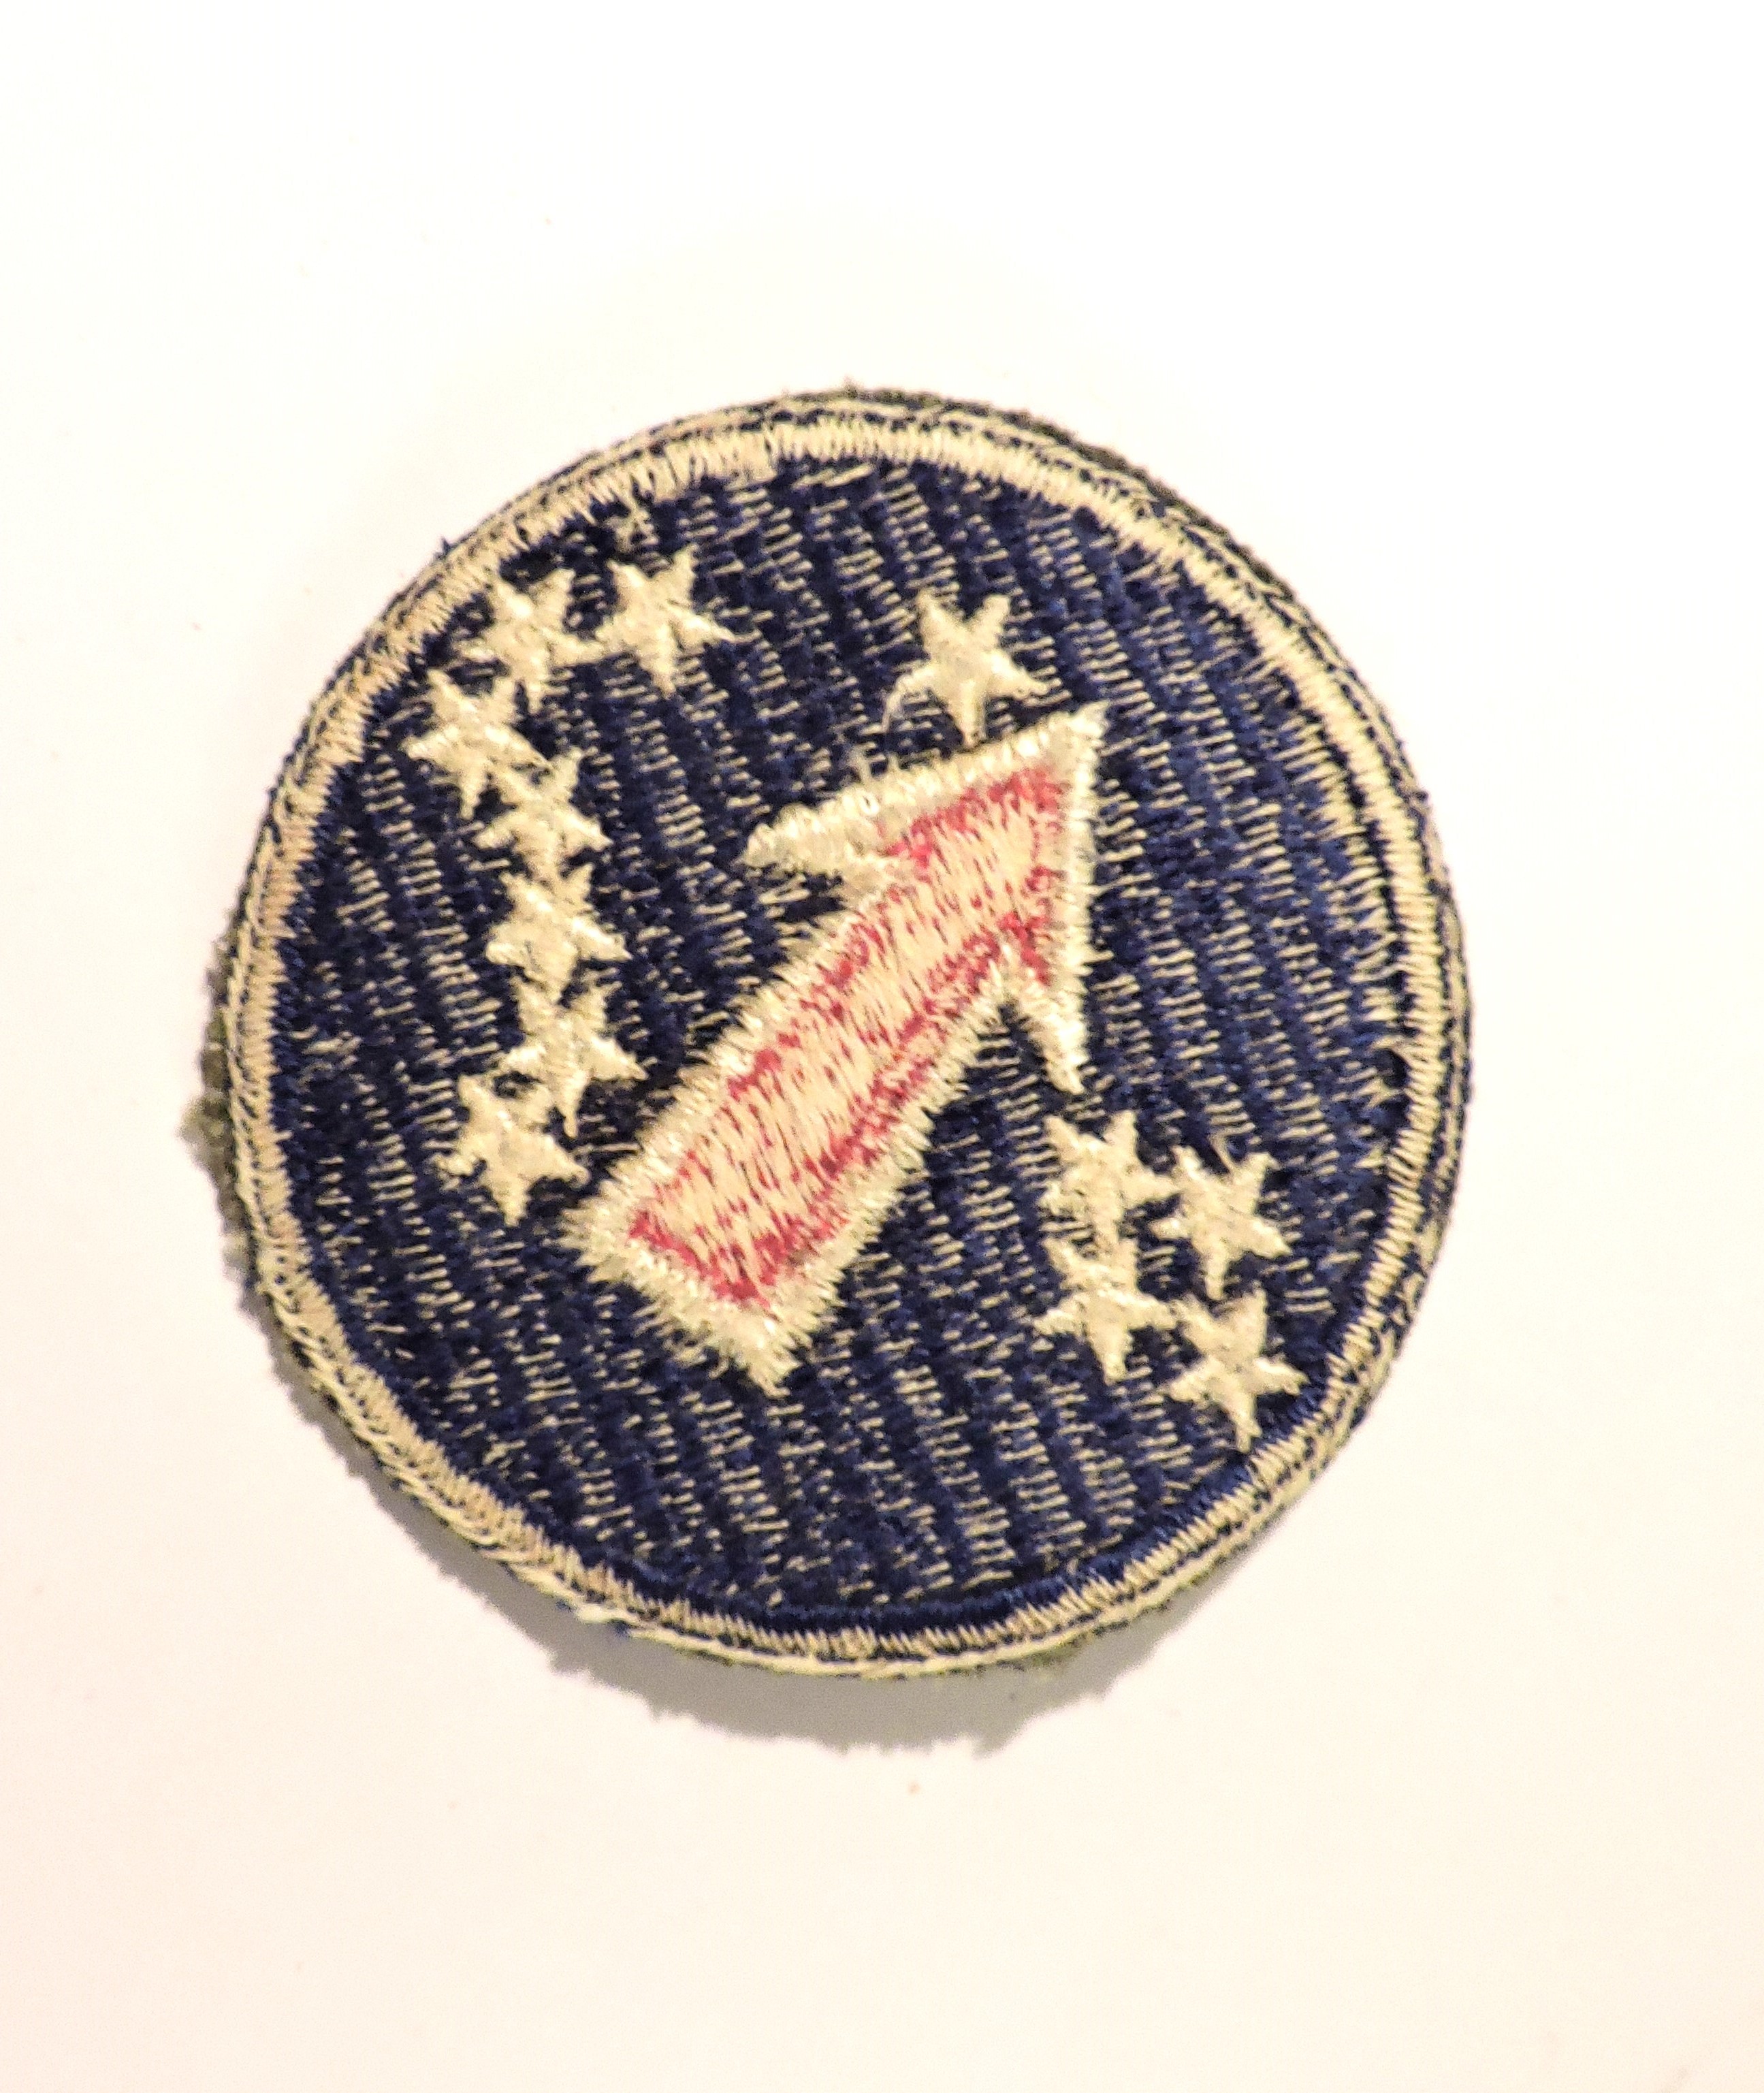 Patch US Army Pacific Command WW2